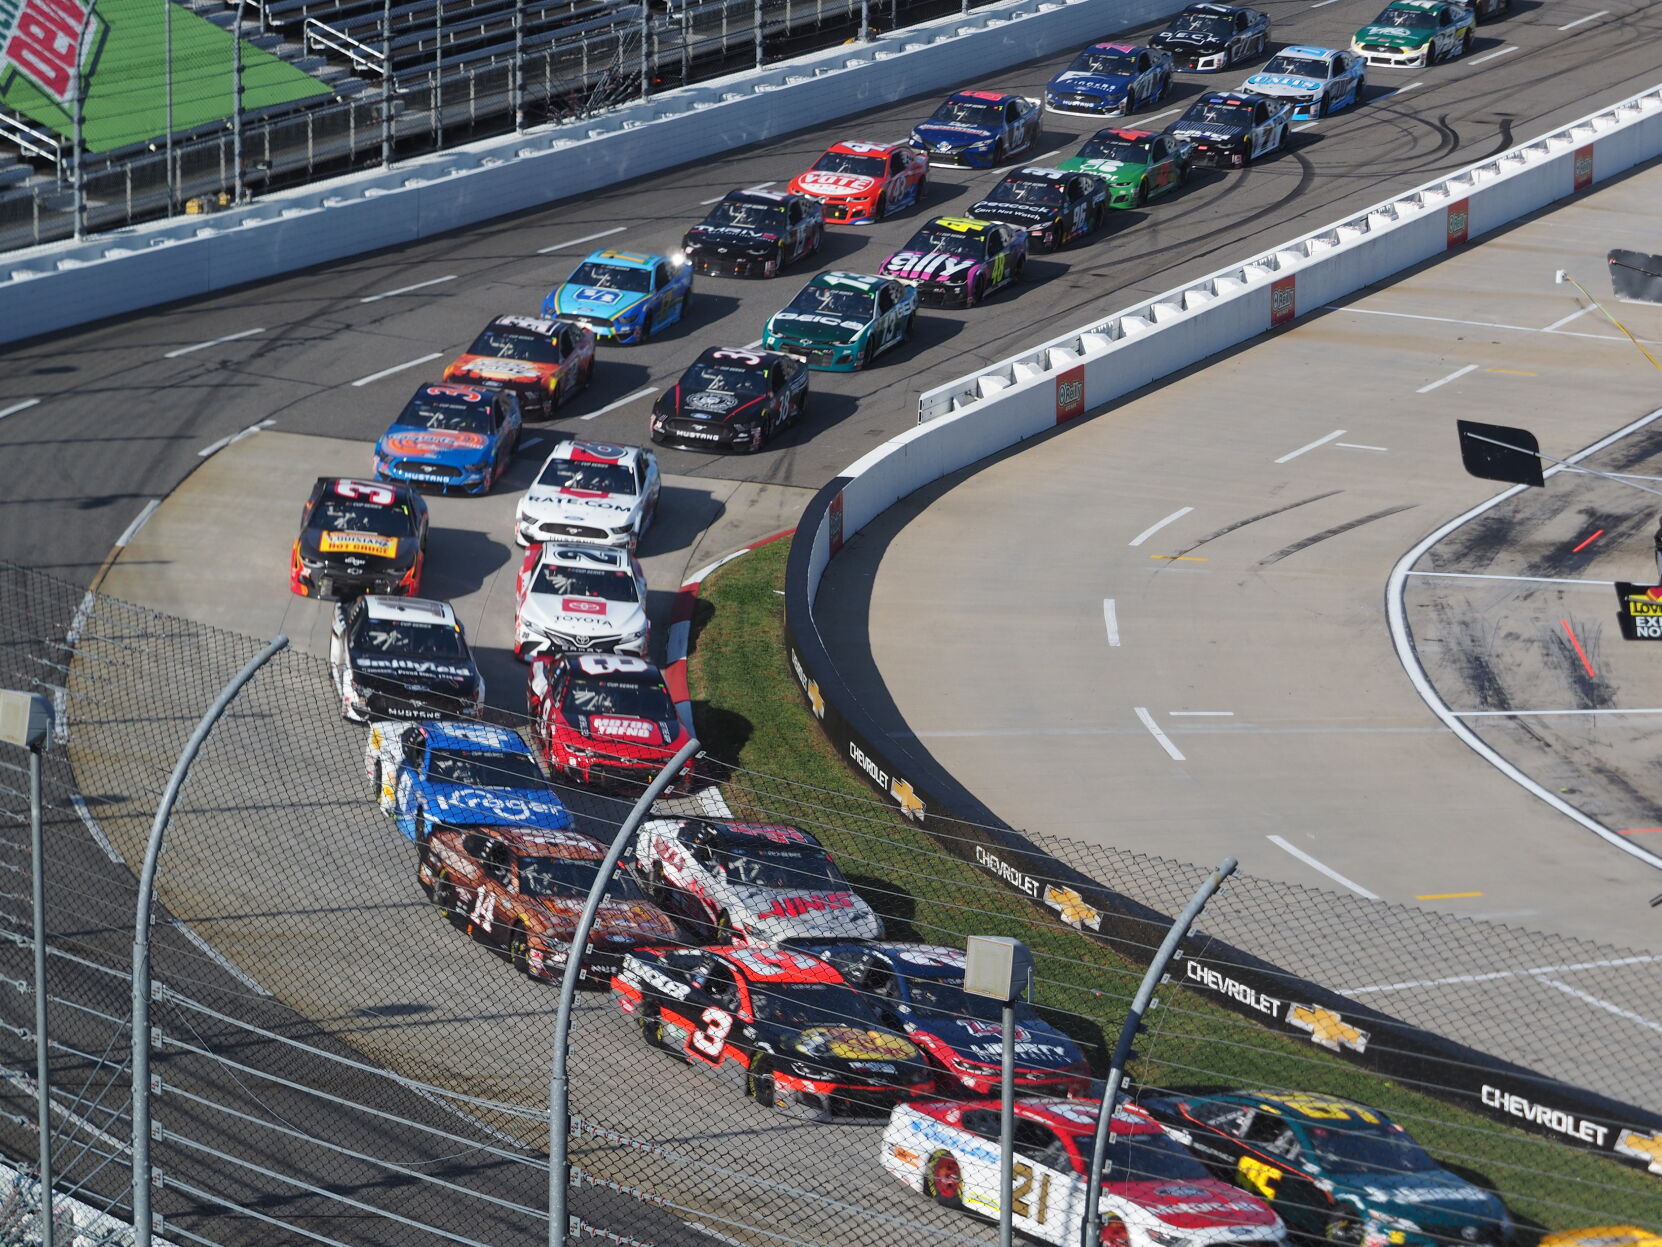 Martinsville gets continuity with NASCARs 2022 schedule